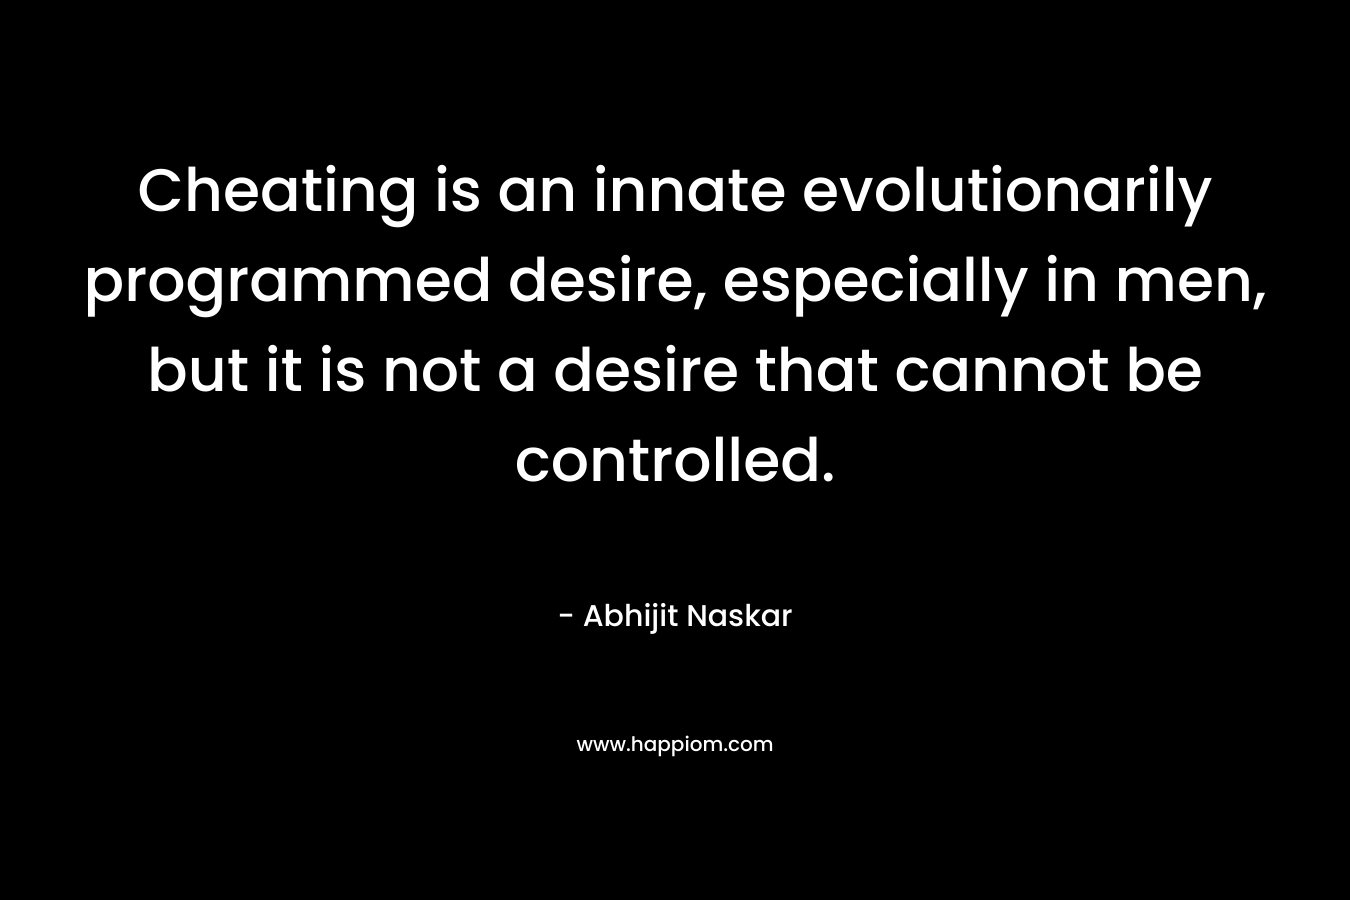 Cheating is an innate evolutionarily programmed desire, especially in men, but it is not a desire that cannot be controlled.